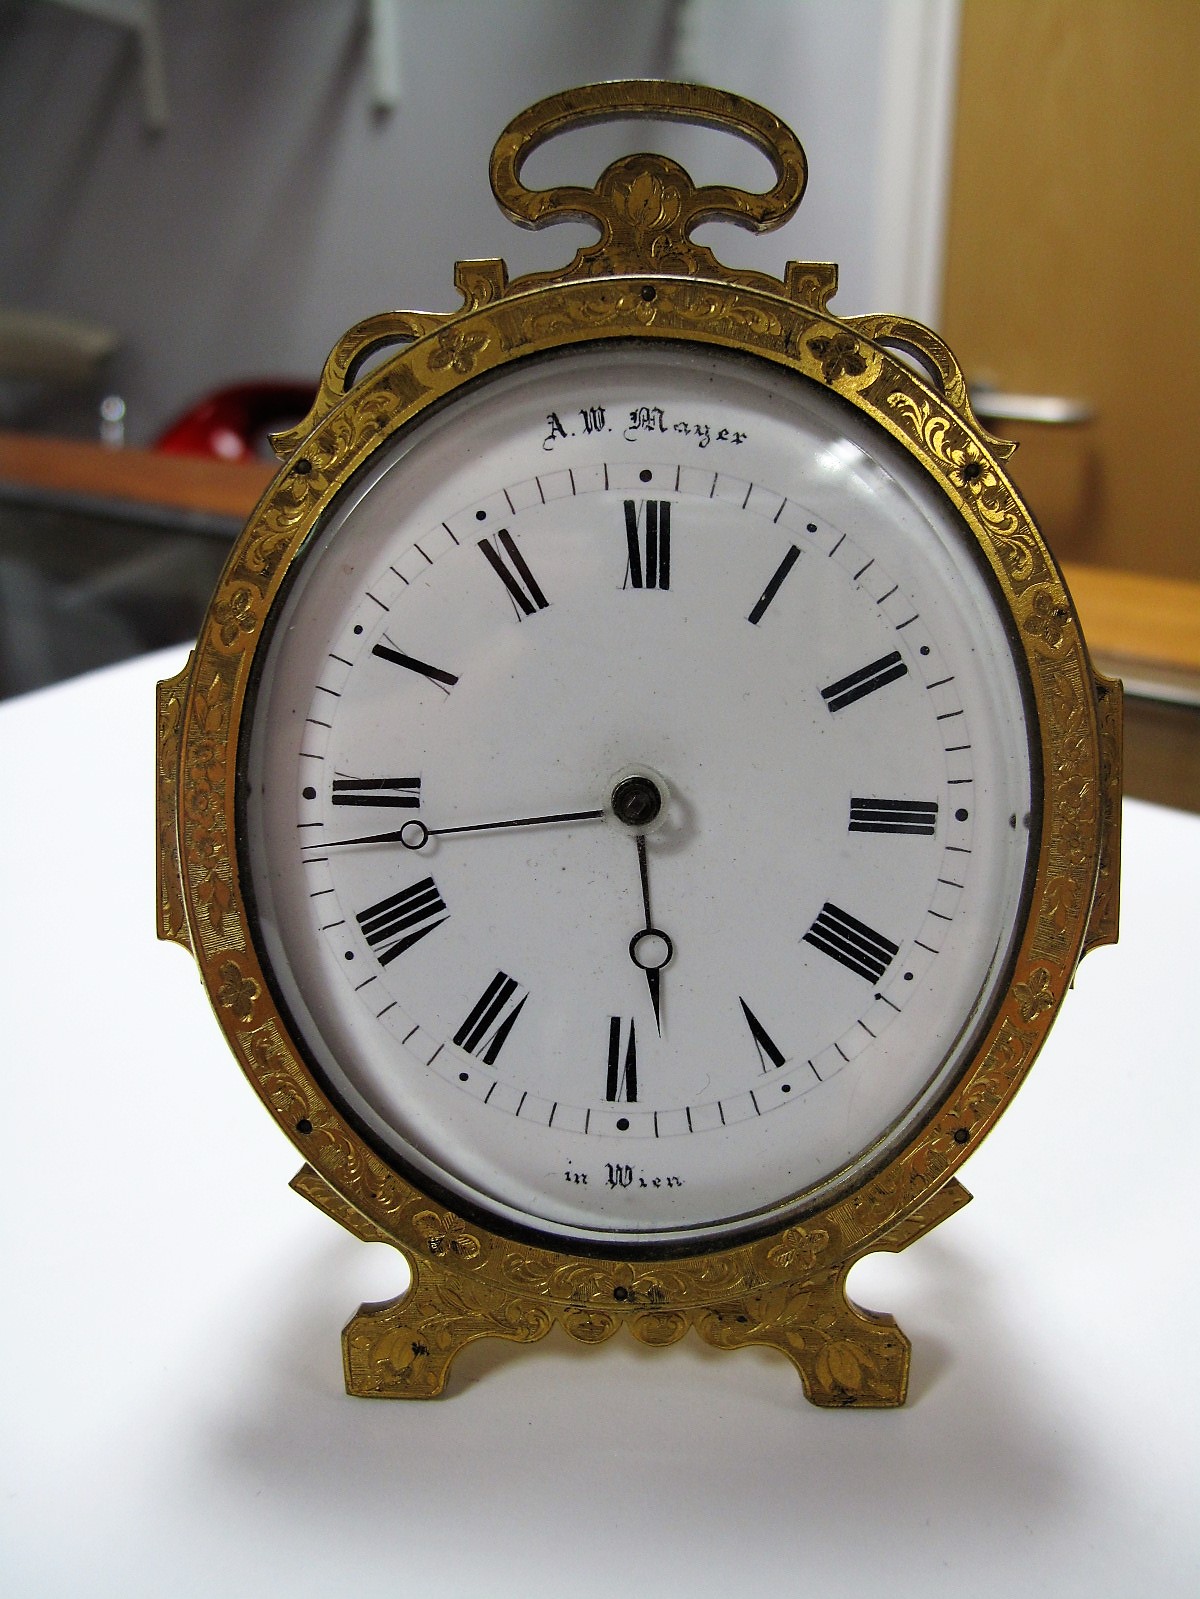 A. W. Mayer in Wien Oval Enamel Dial Table Clock, with gilt metal frame having easel back. - Image 2 of 9